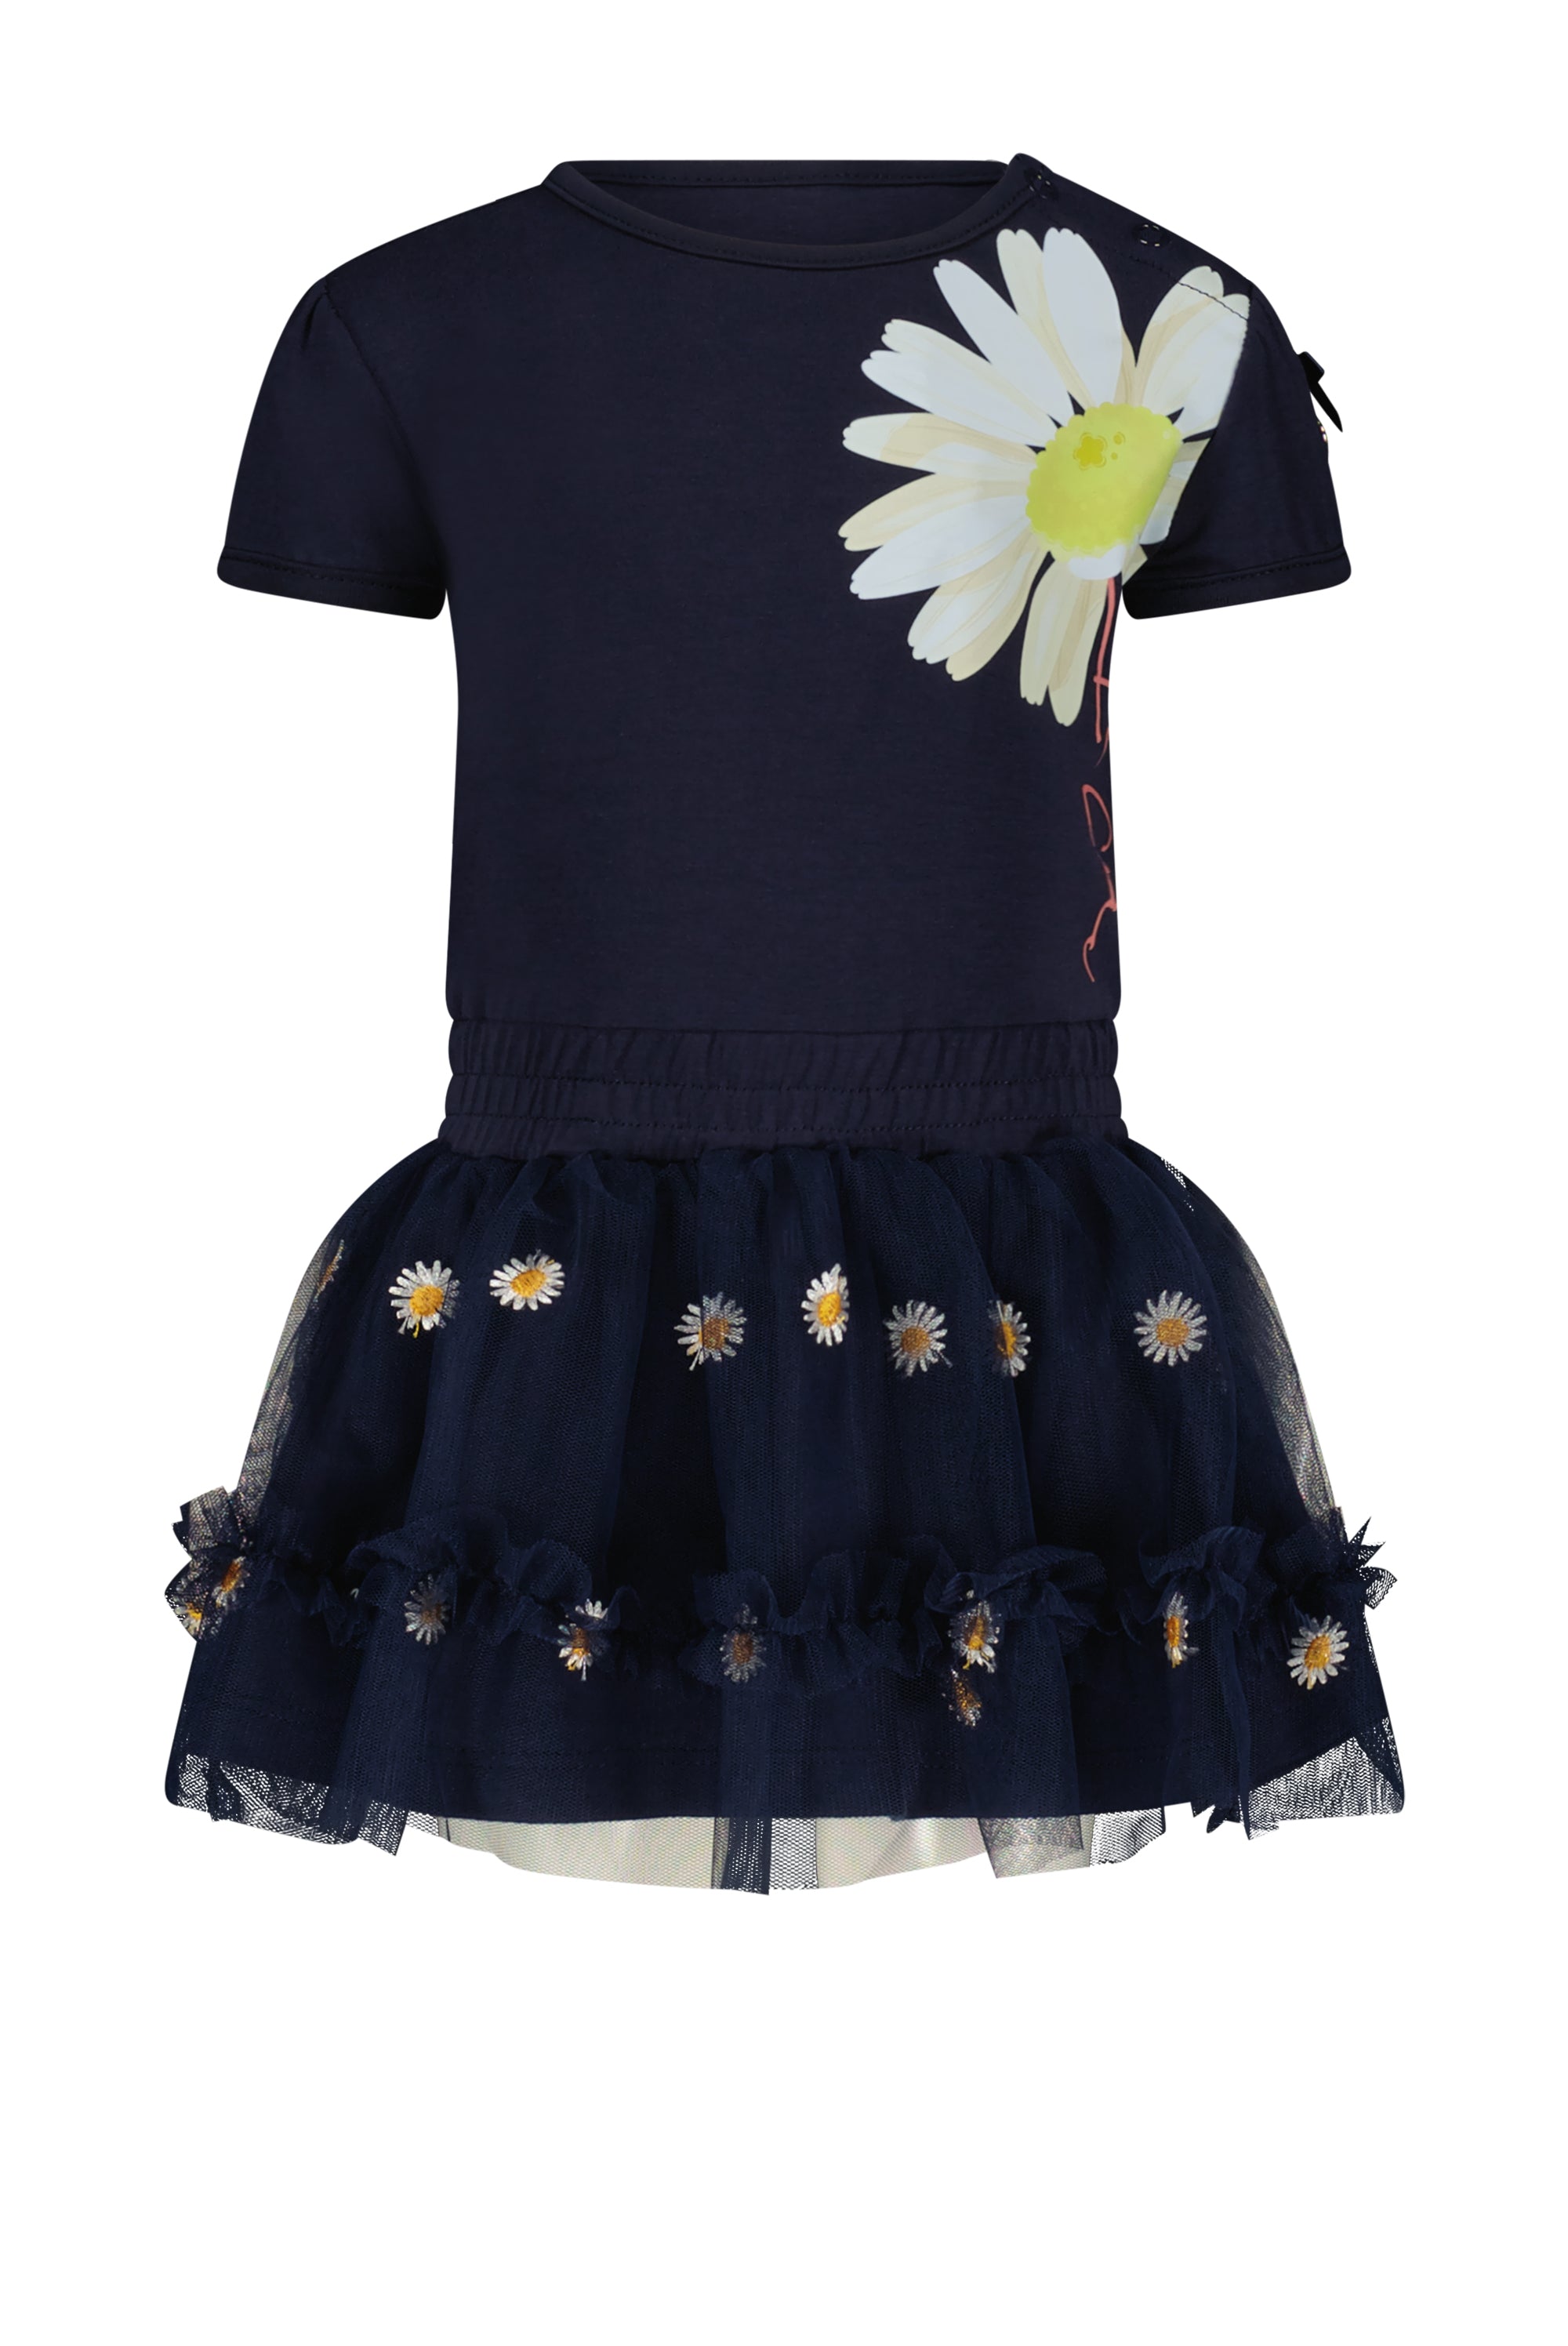 Image of SQUIDIE daisy embroidery dress